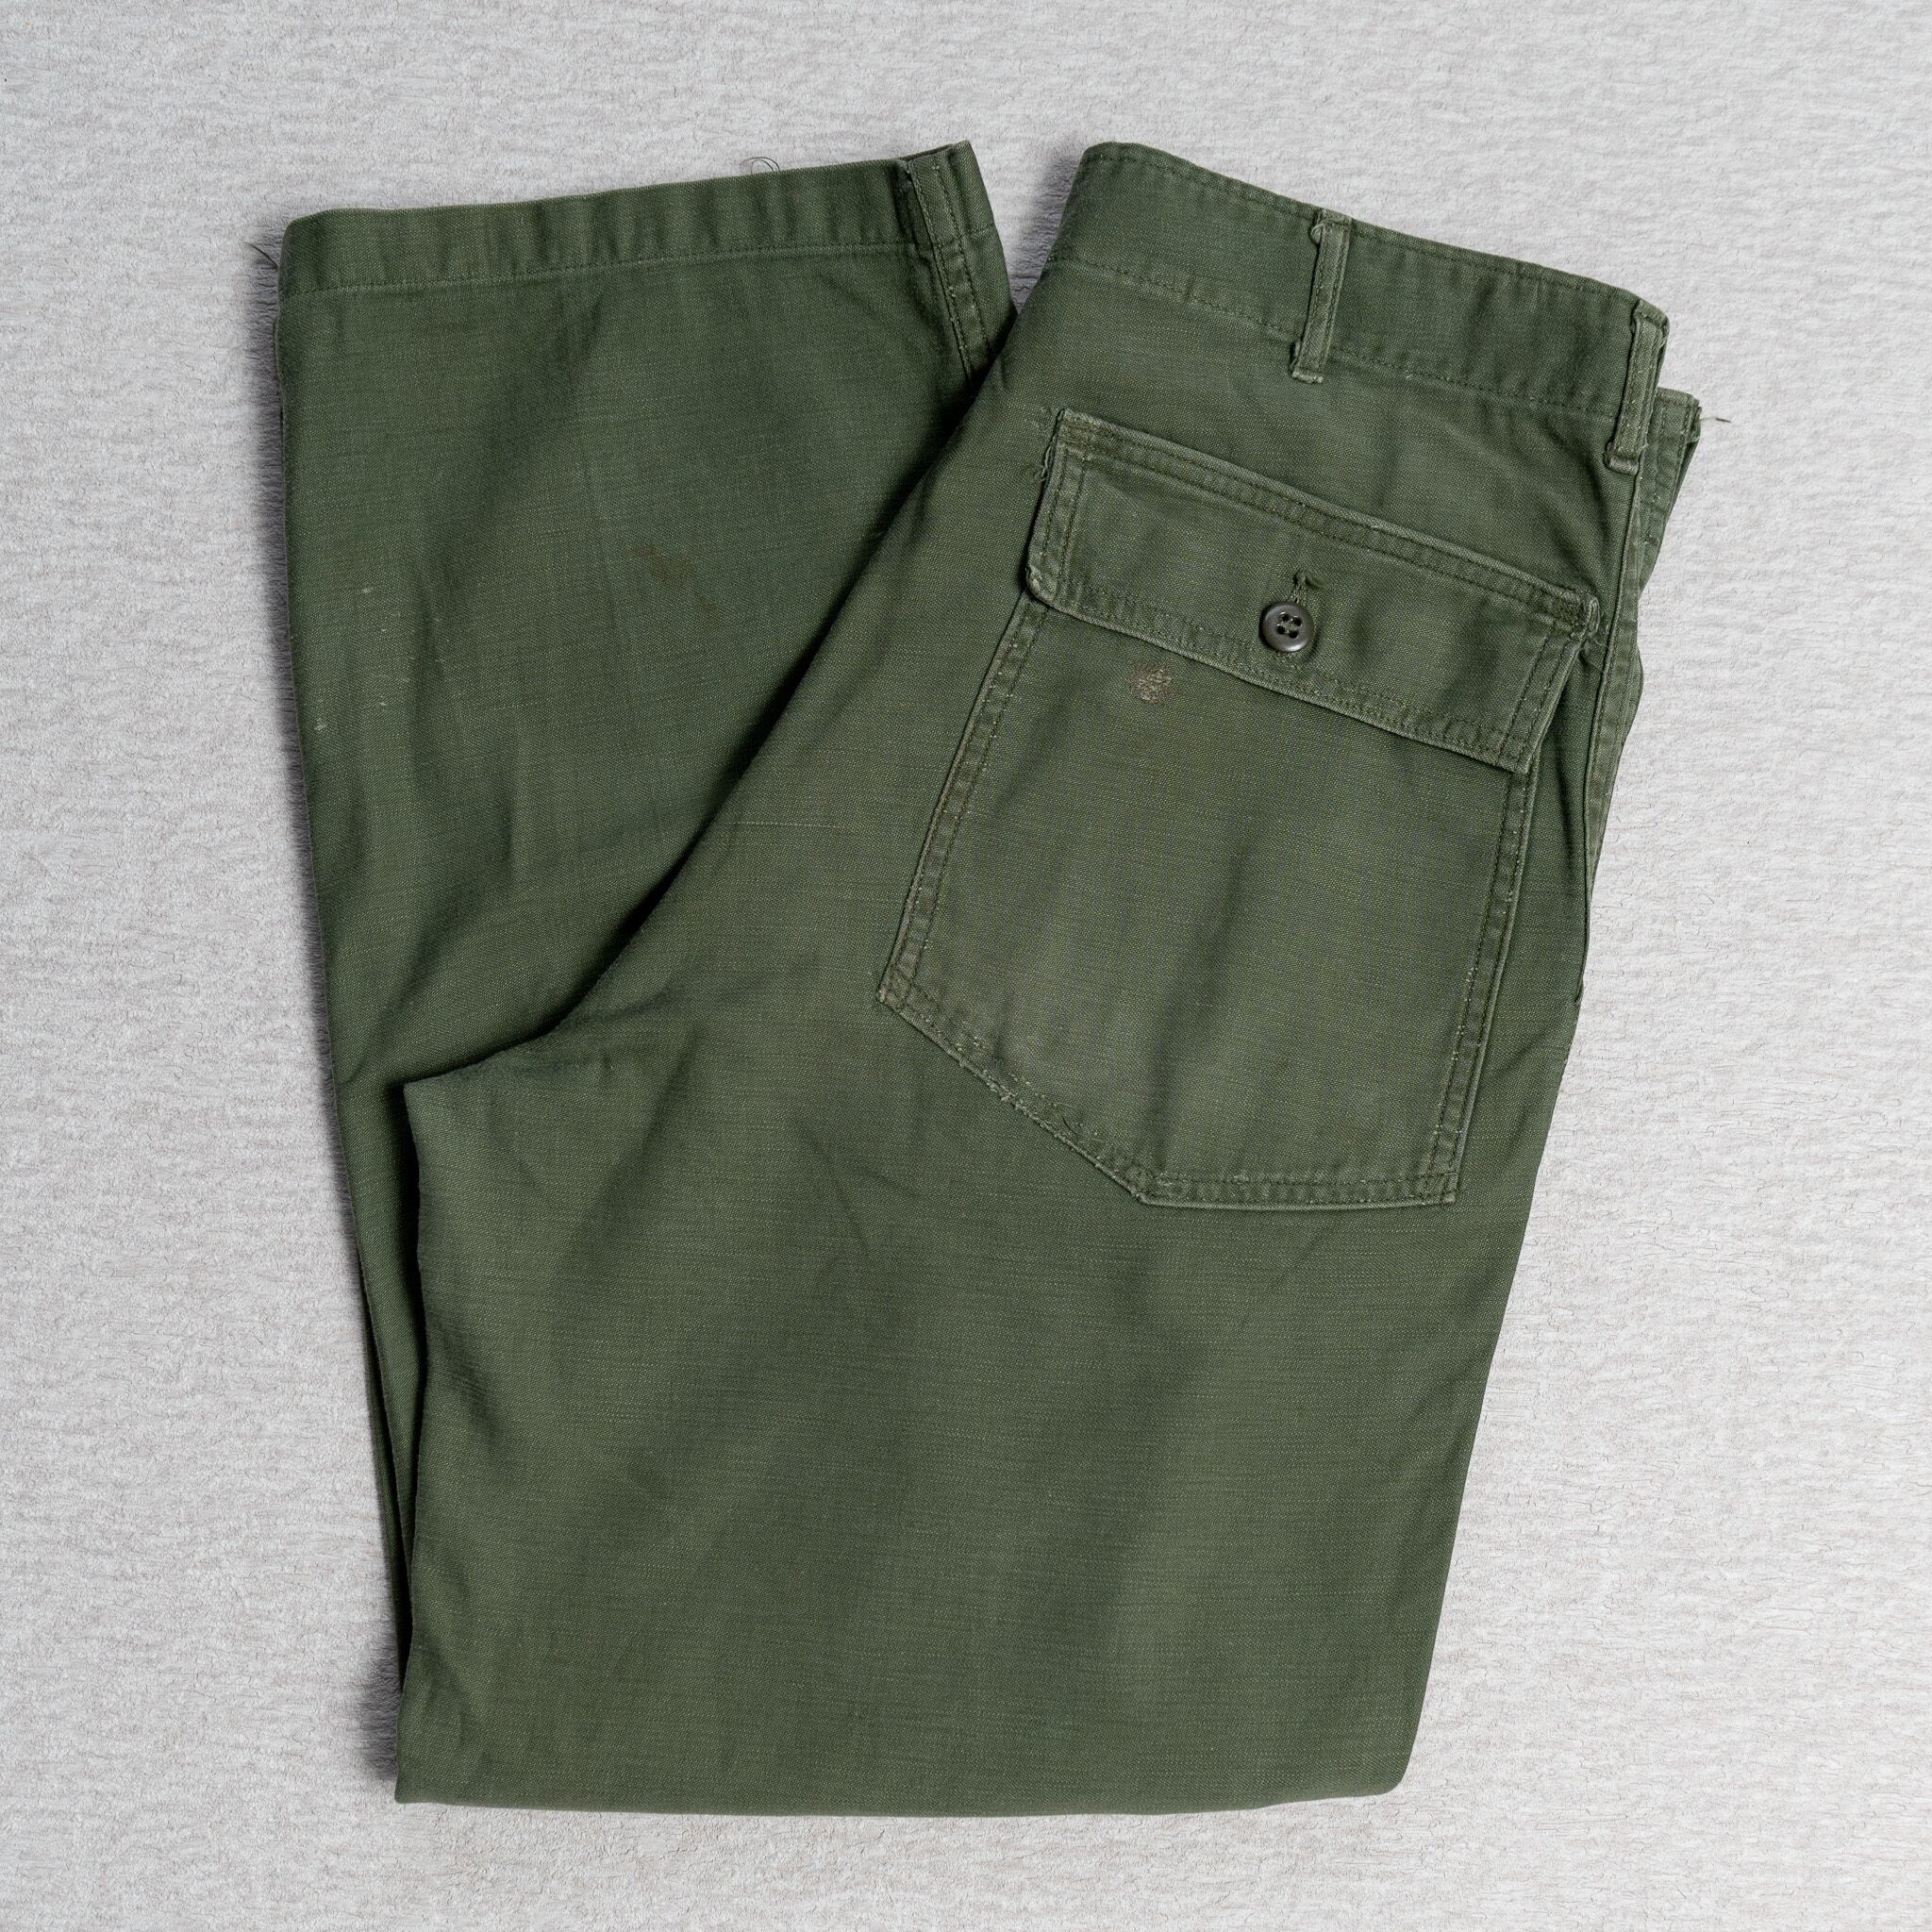 34×31】U.S.Army Utility Trousers OG-107 Used 実物 米軍 ベイカー